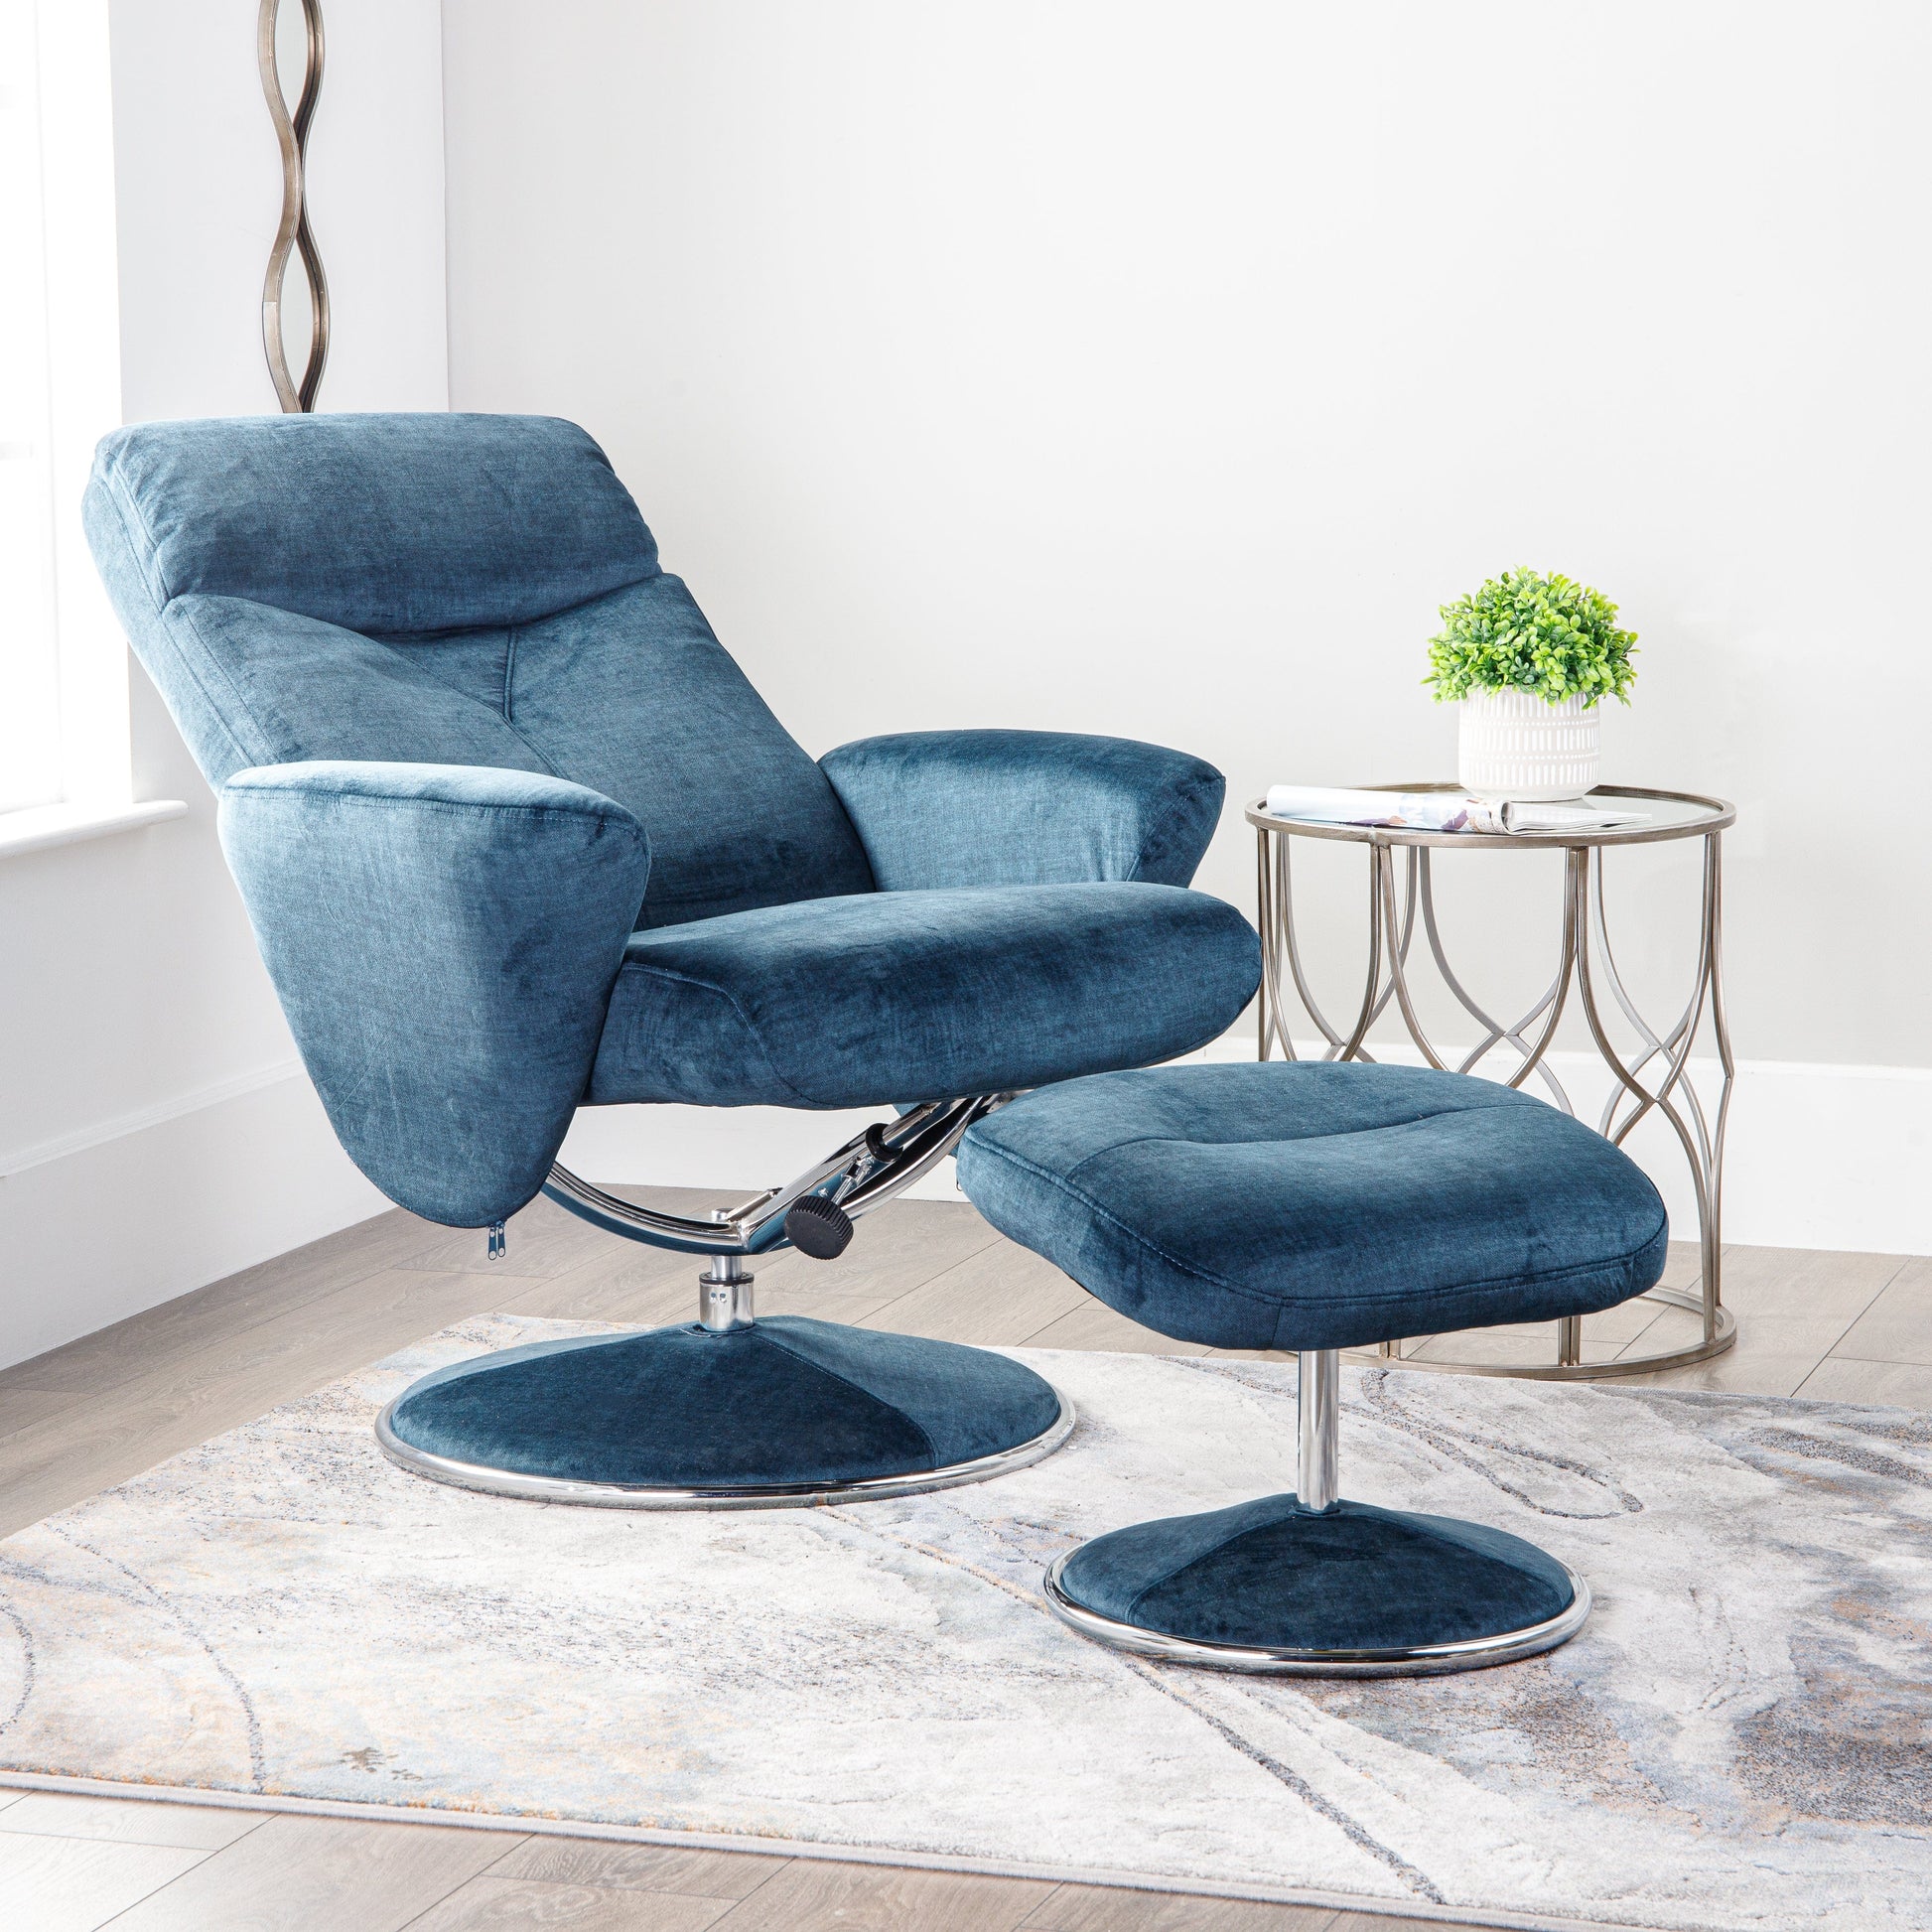 Furniture  -  Houston Blue Recliner Chair & Stool  -  60004238